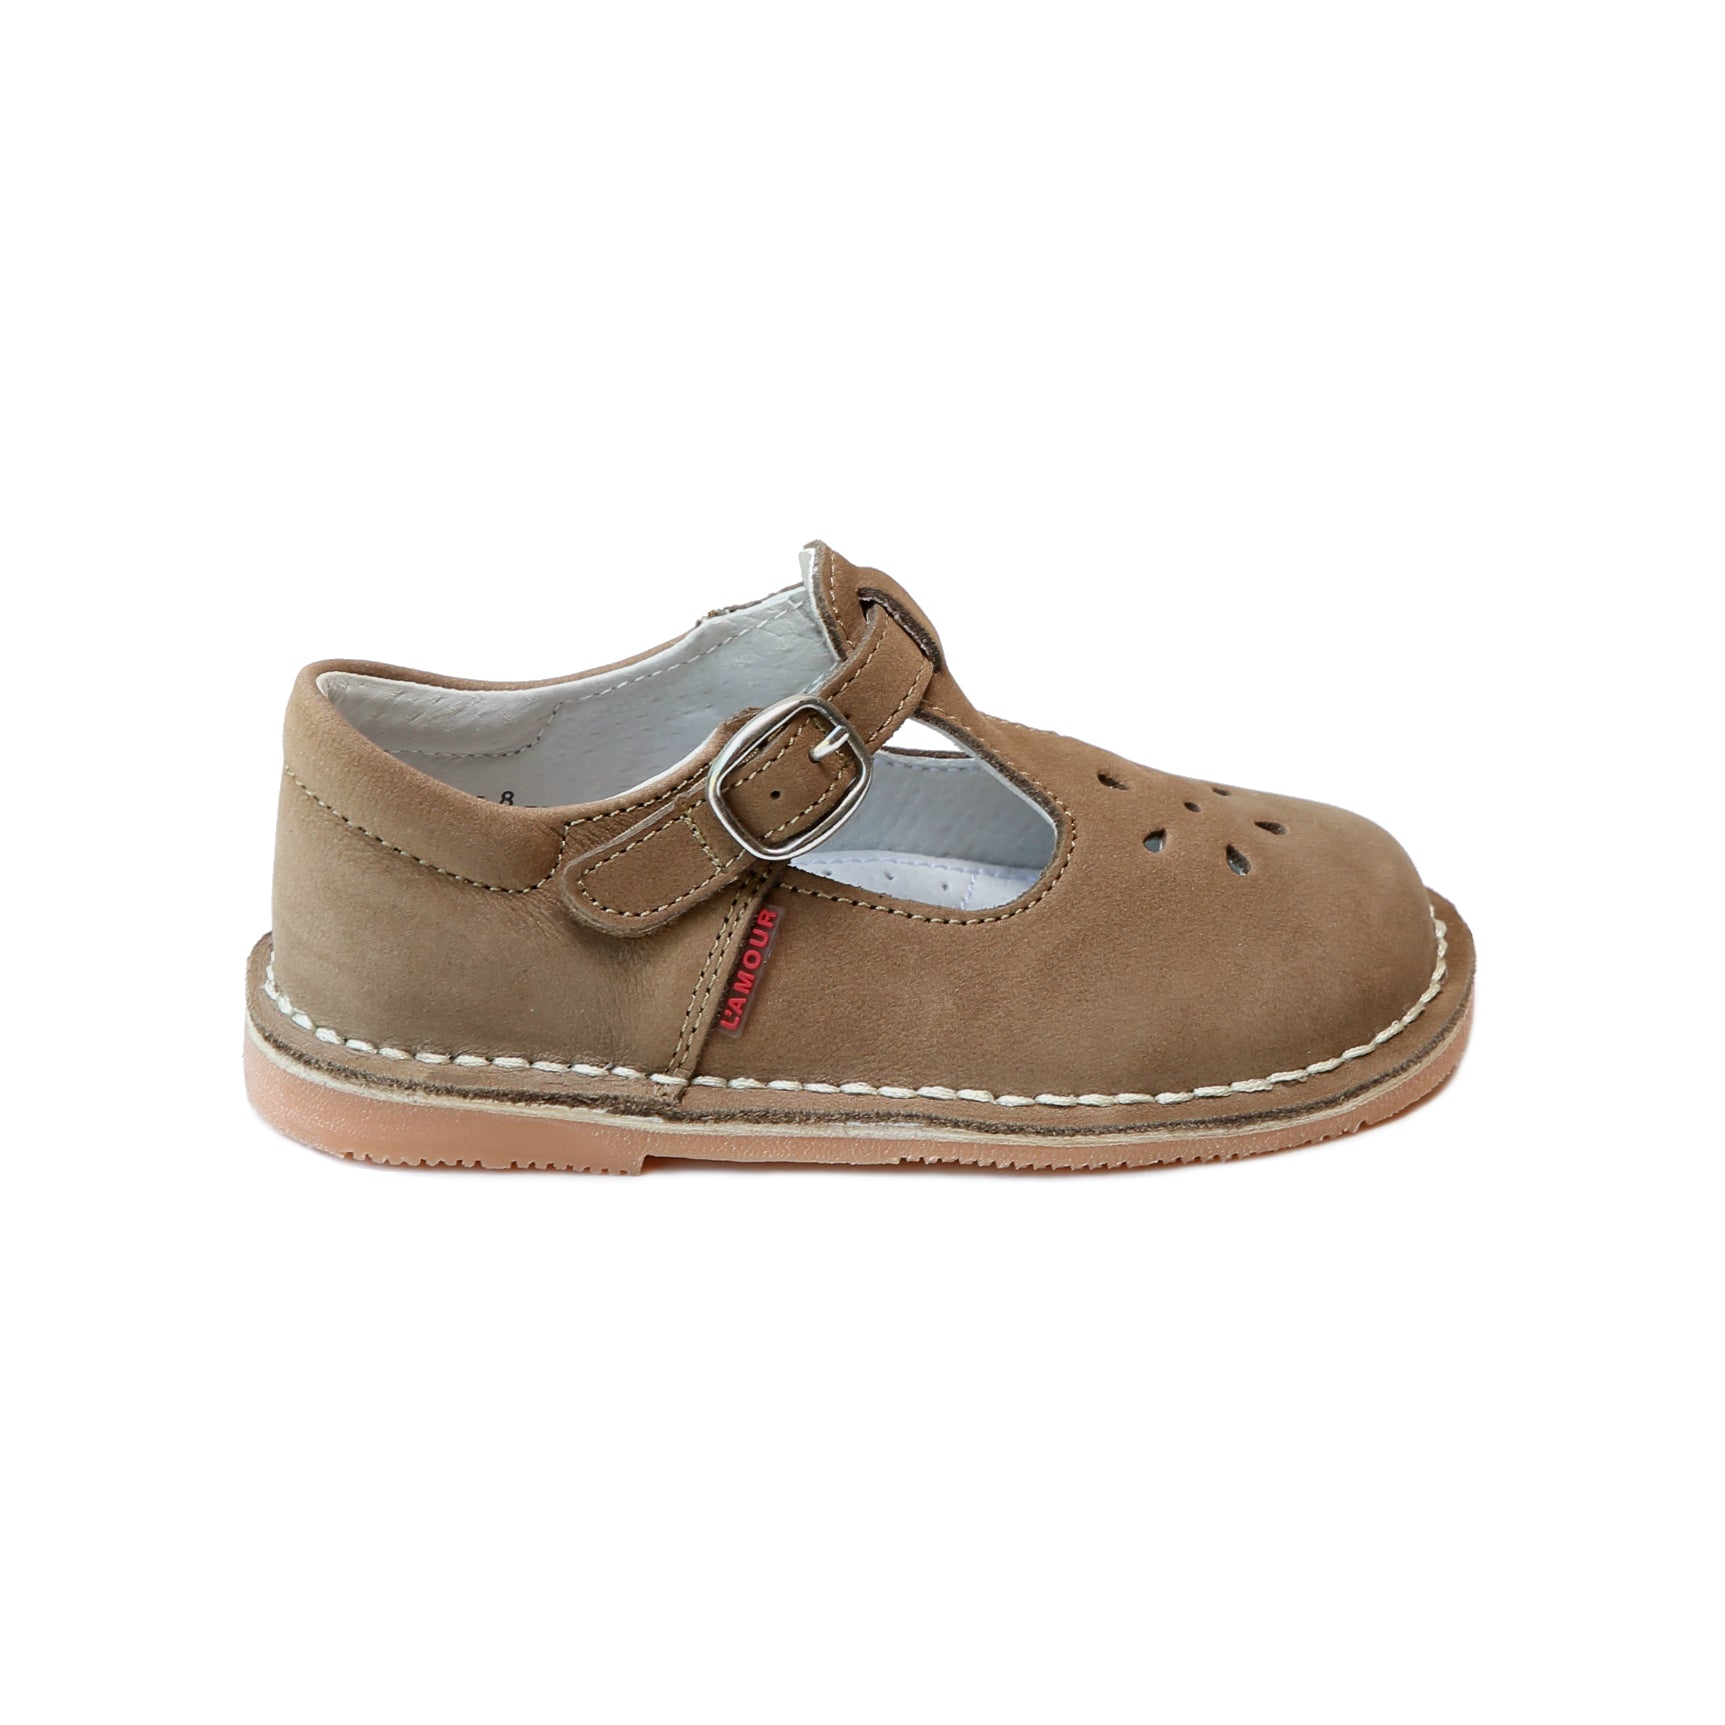 L'Amour Joy Classic Nubuck Leather T-Strap Mary Jane Mary Janes